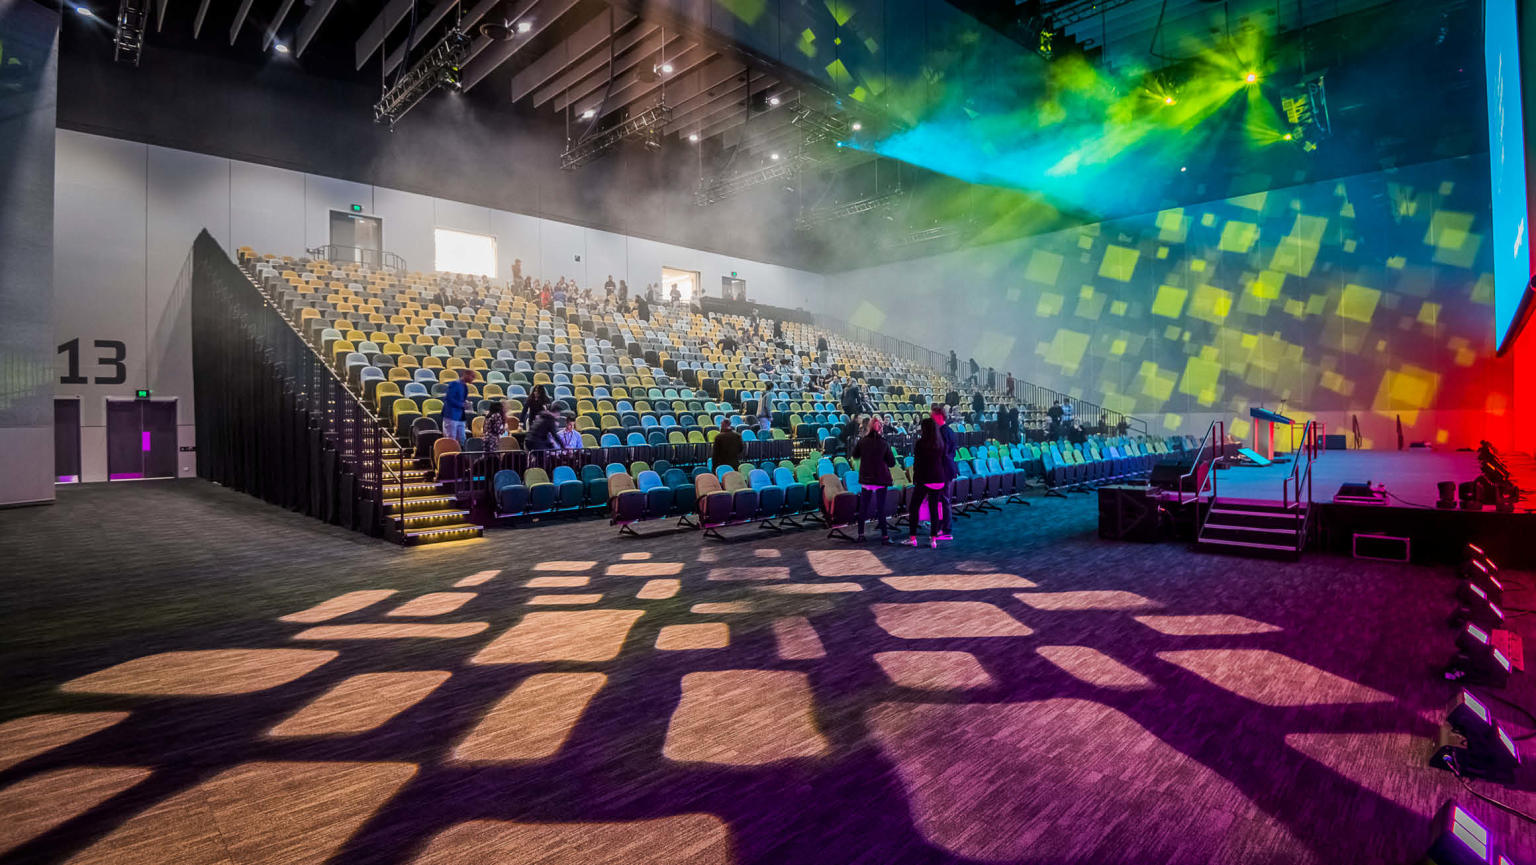 A vibrant auditorium with tiered seating overlooking a well-lit stage, adorned with captivating colourful lights.